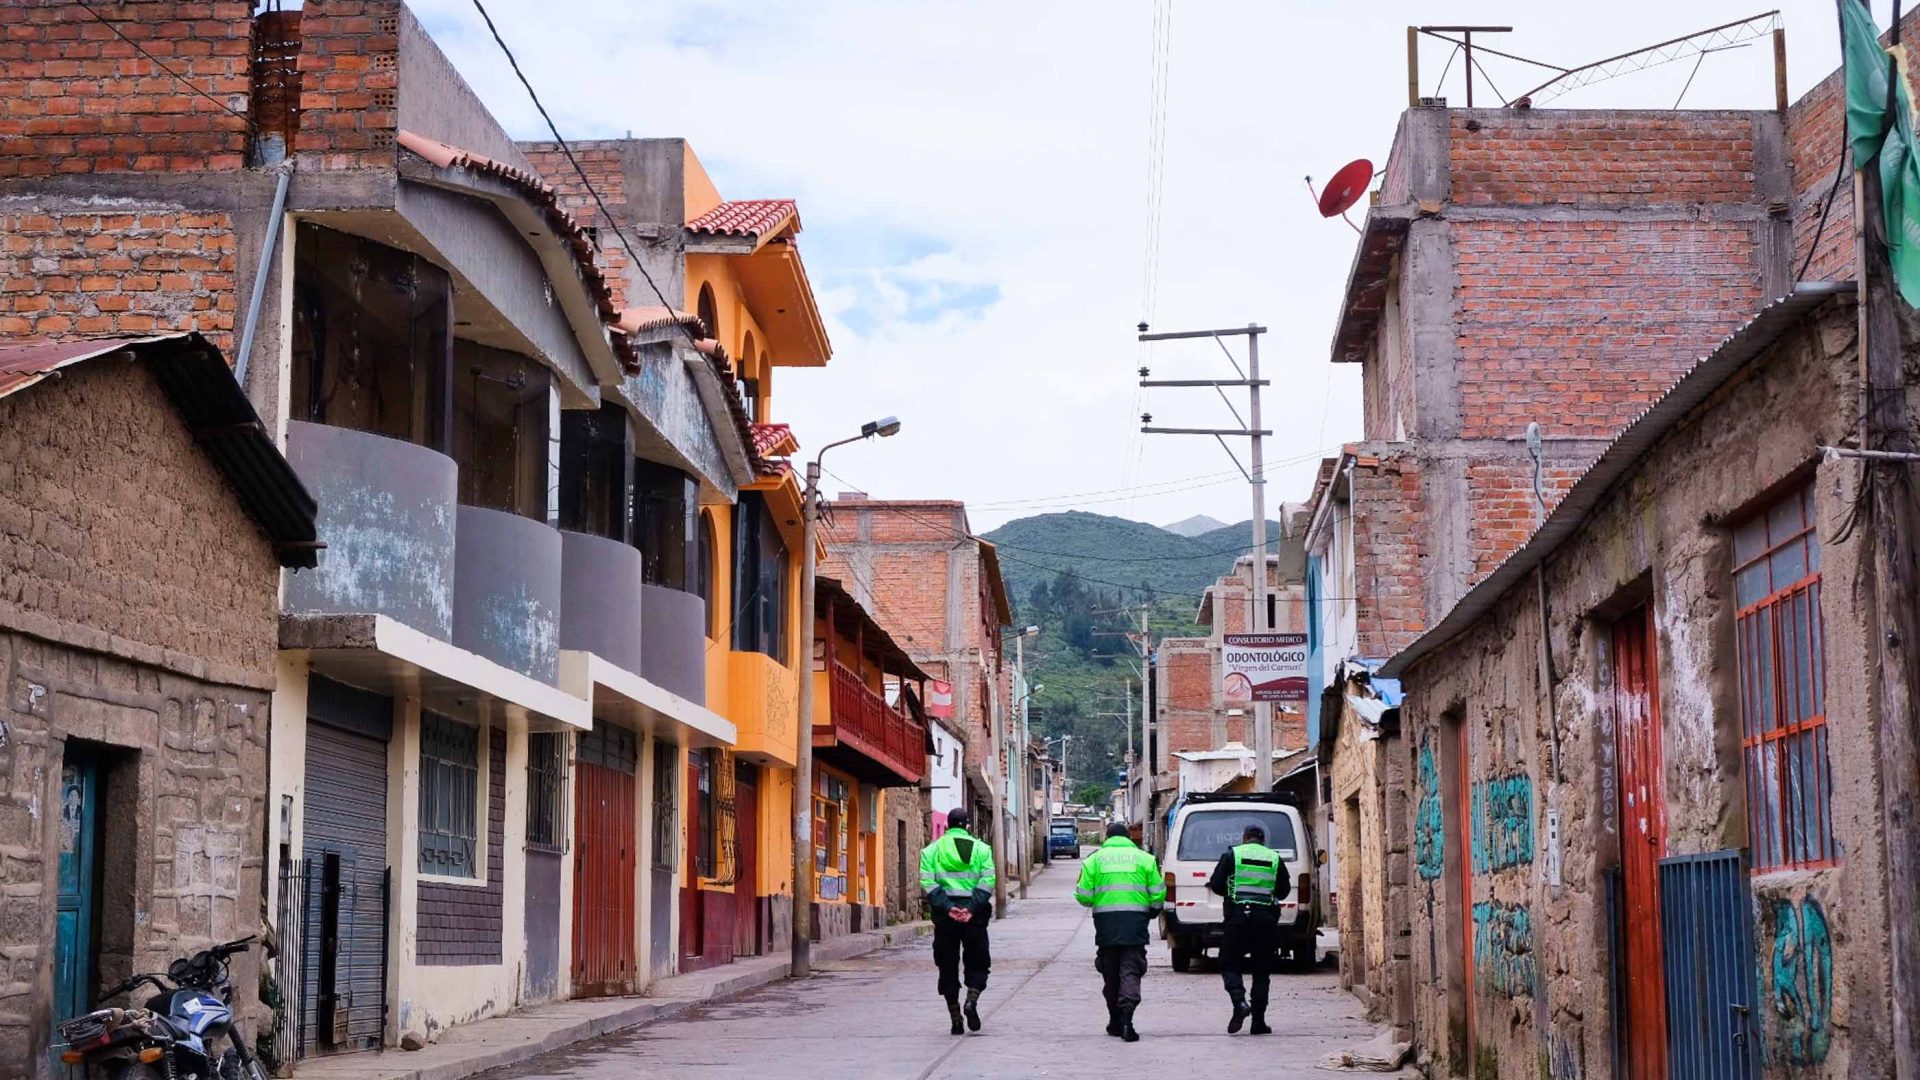 The backs of three police officer in a Peruvian street.